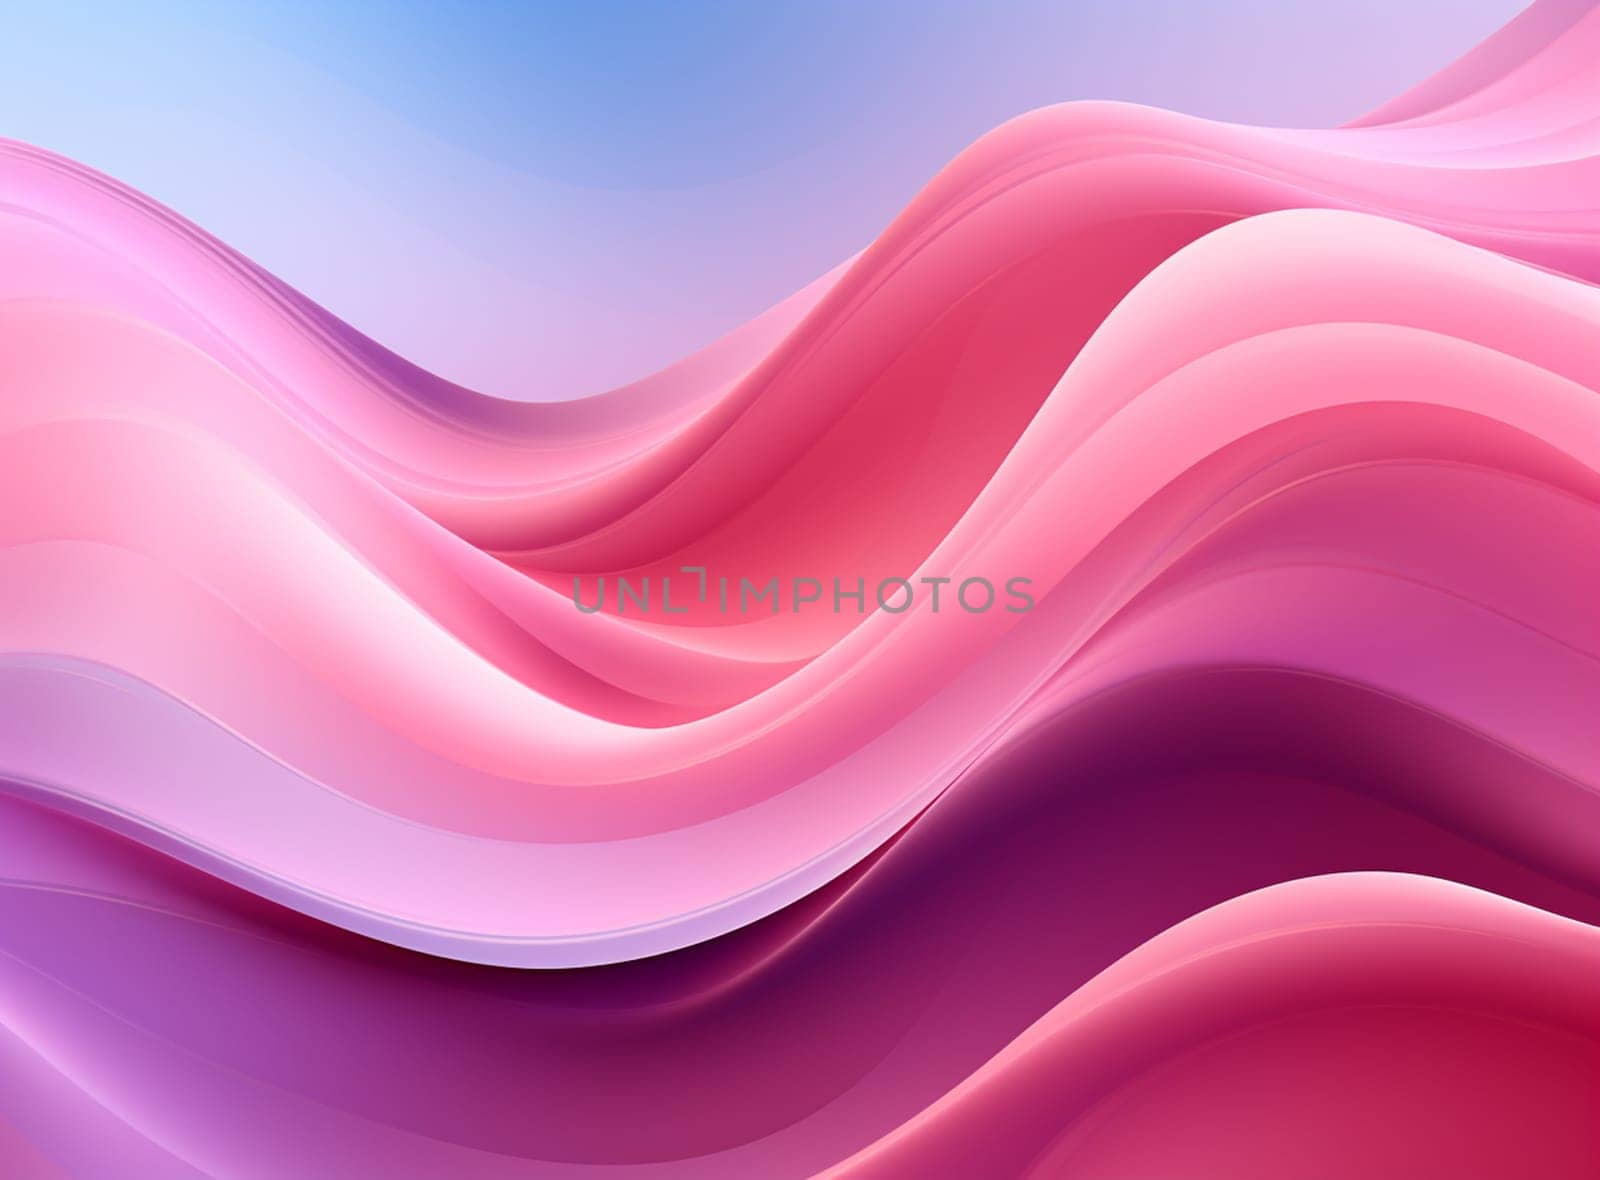 an abstract 3D image of digital waves in shades of Pink, Blue and purple - wave illustration. by Andelov13